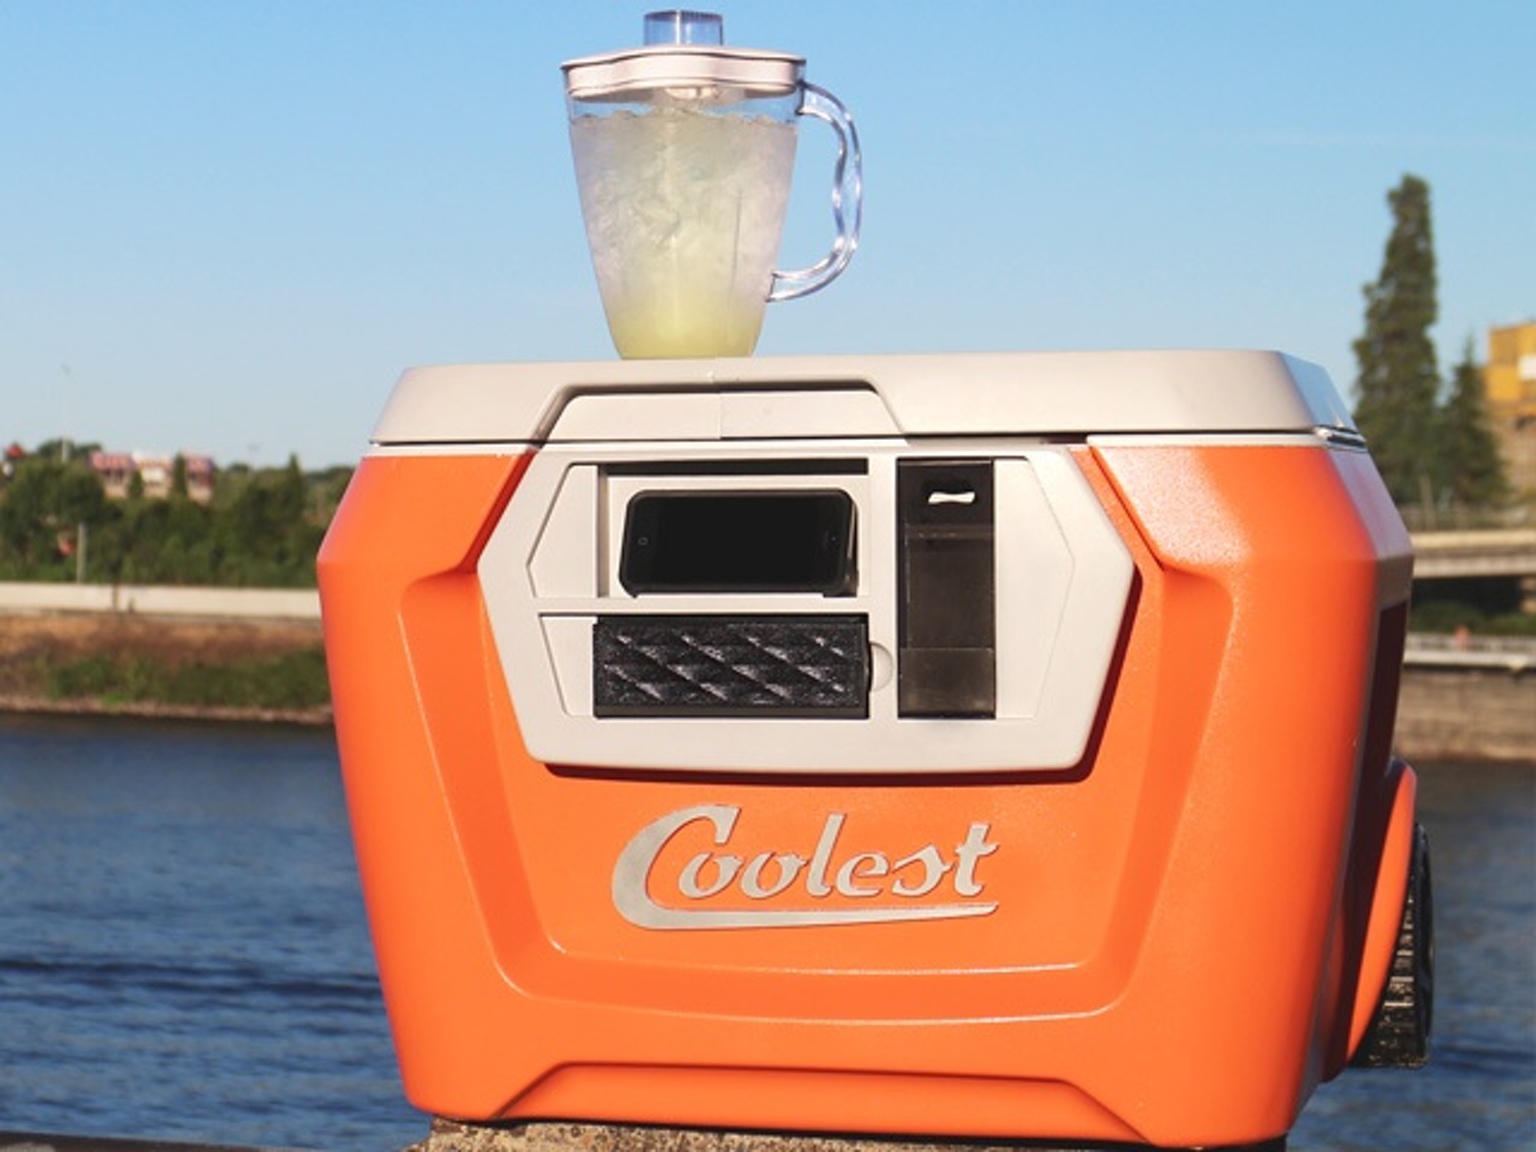 Cooler Raises $13.3M On Kickstarter, Tries To Sell More On Amazon Before Shipping To All Backers